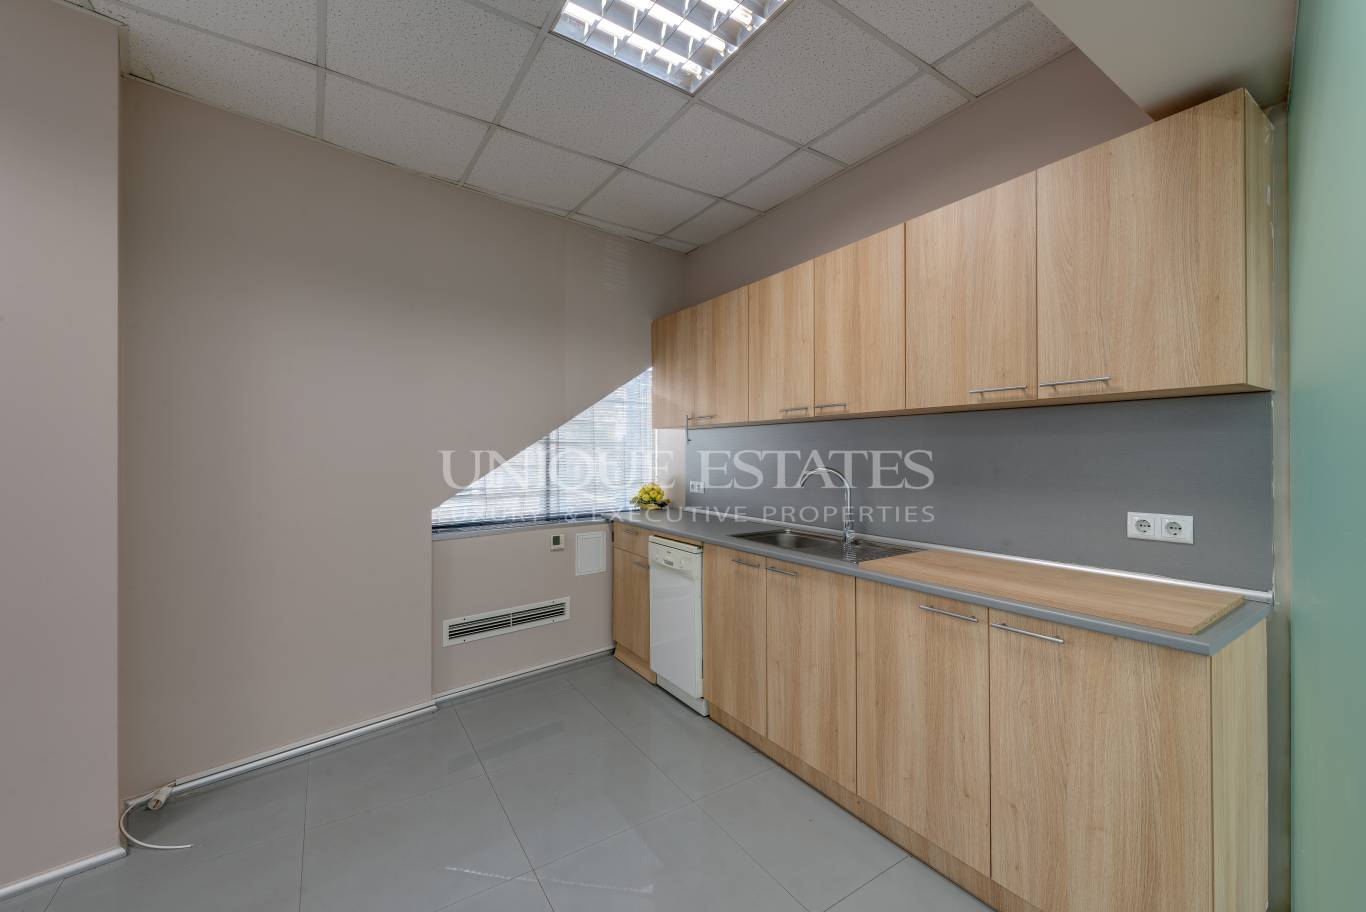 Office Building / Building for sale in Sofia, Downtown with listing ID: K10366 - image 6